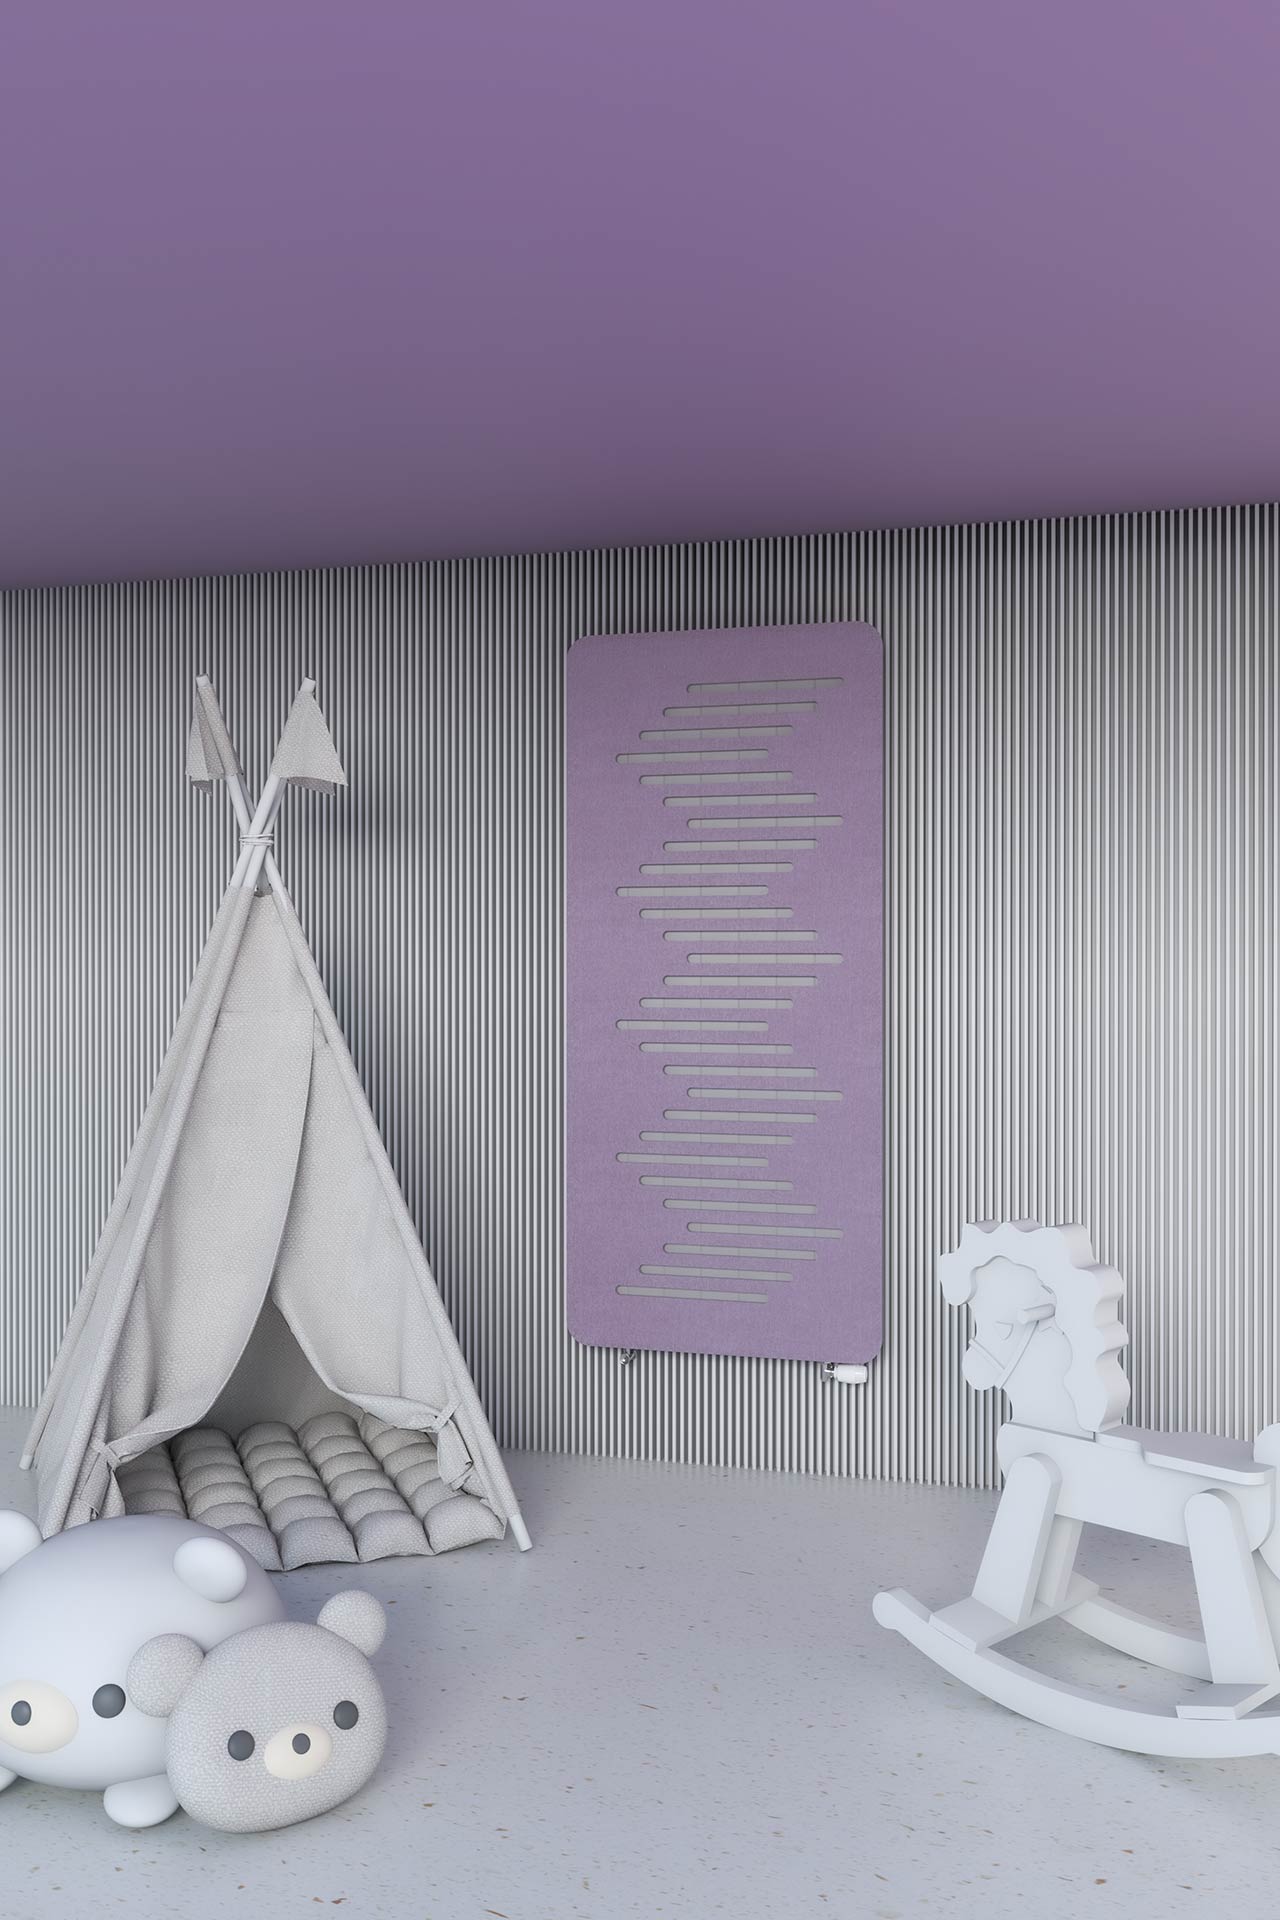 Colorful purple radiotor cover in child bedroom